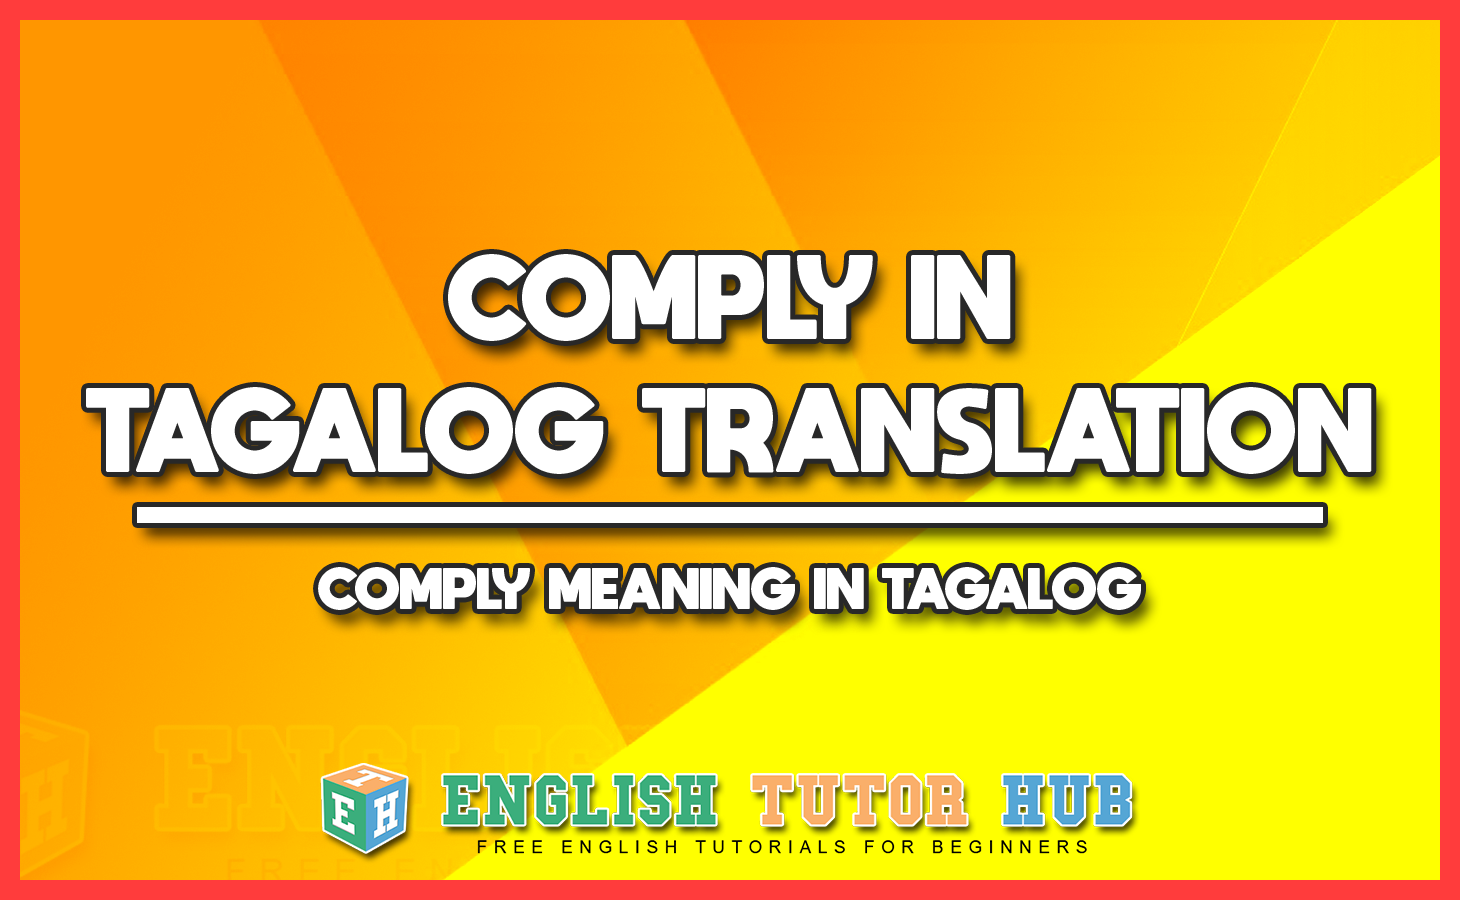 COMPLY IN TAGALOG TRANSLATION - COMPLY MEANING IN TAGALOG